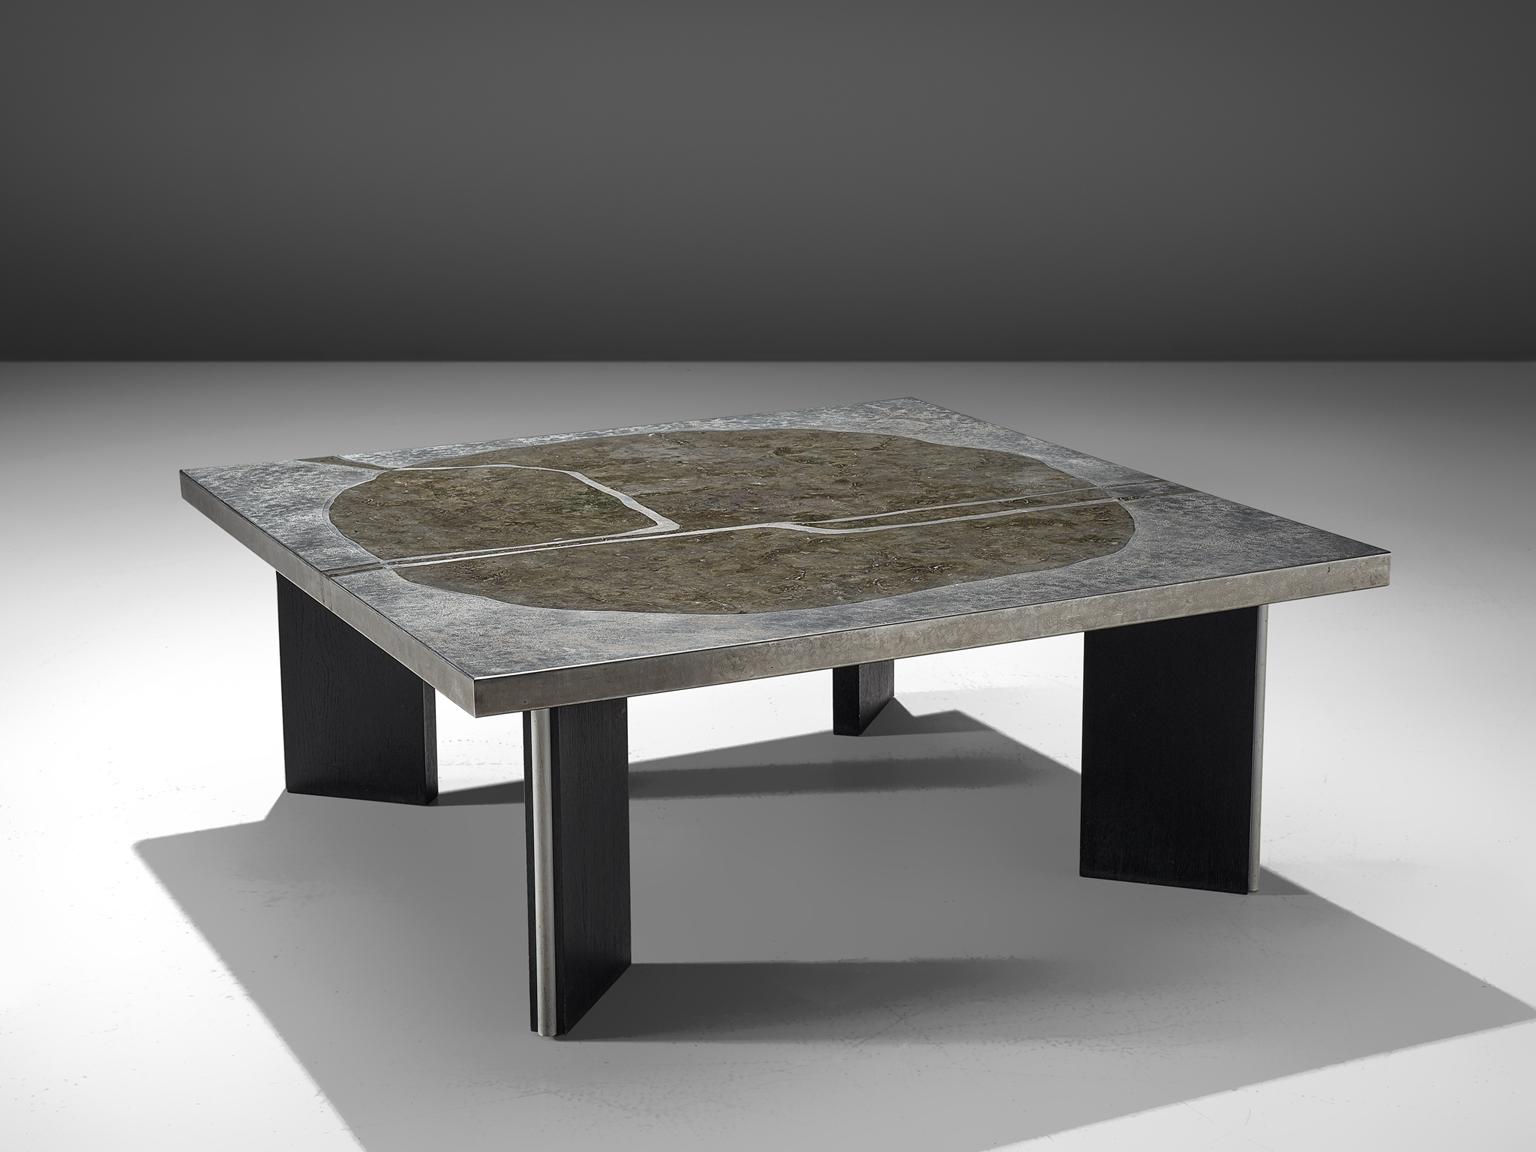 Coffee table, stainless steel, aluminium, wood, Europe, 1970.

This coffee table is made in the postmodern period in Europe. It bears strong resemblances to the style of Heinz Lilienthal and De Sede. The table is made of metal and aluminium